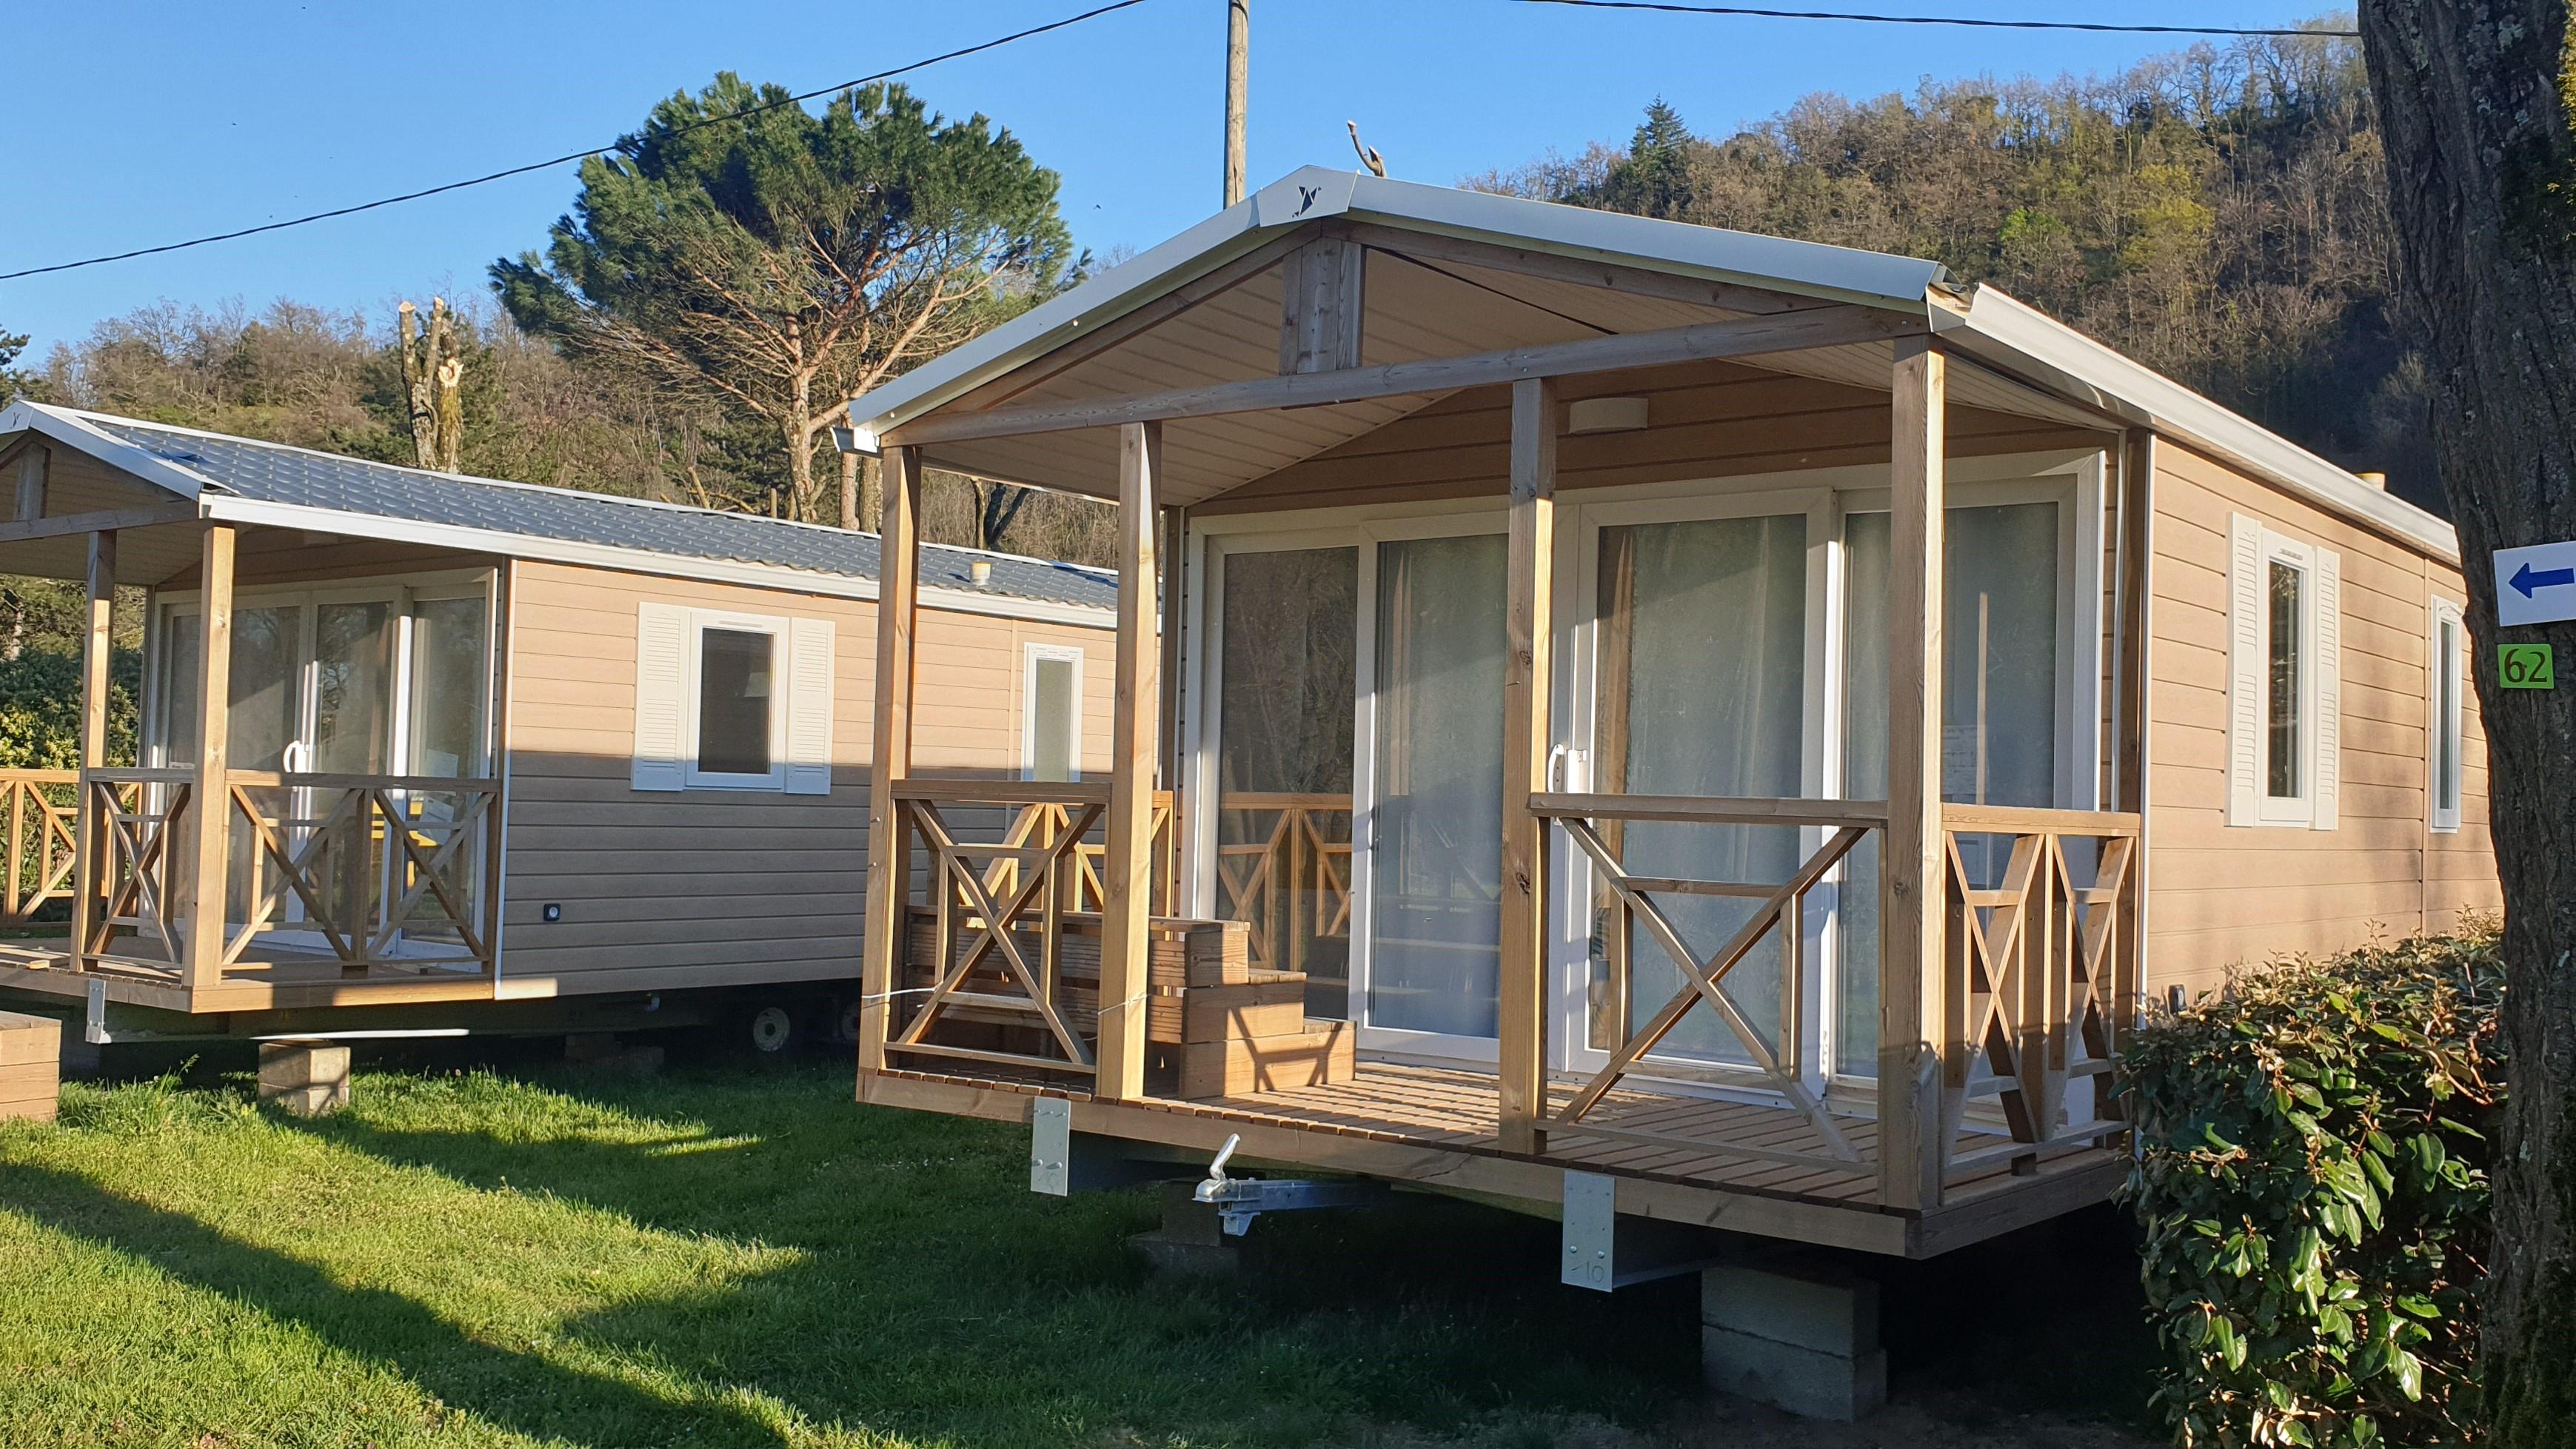 Huuraccommodatie - Mobil Home Premium Evo 33 Tp Climatisé 2 Chambres - CAMPING LES FOULONS